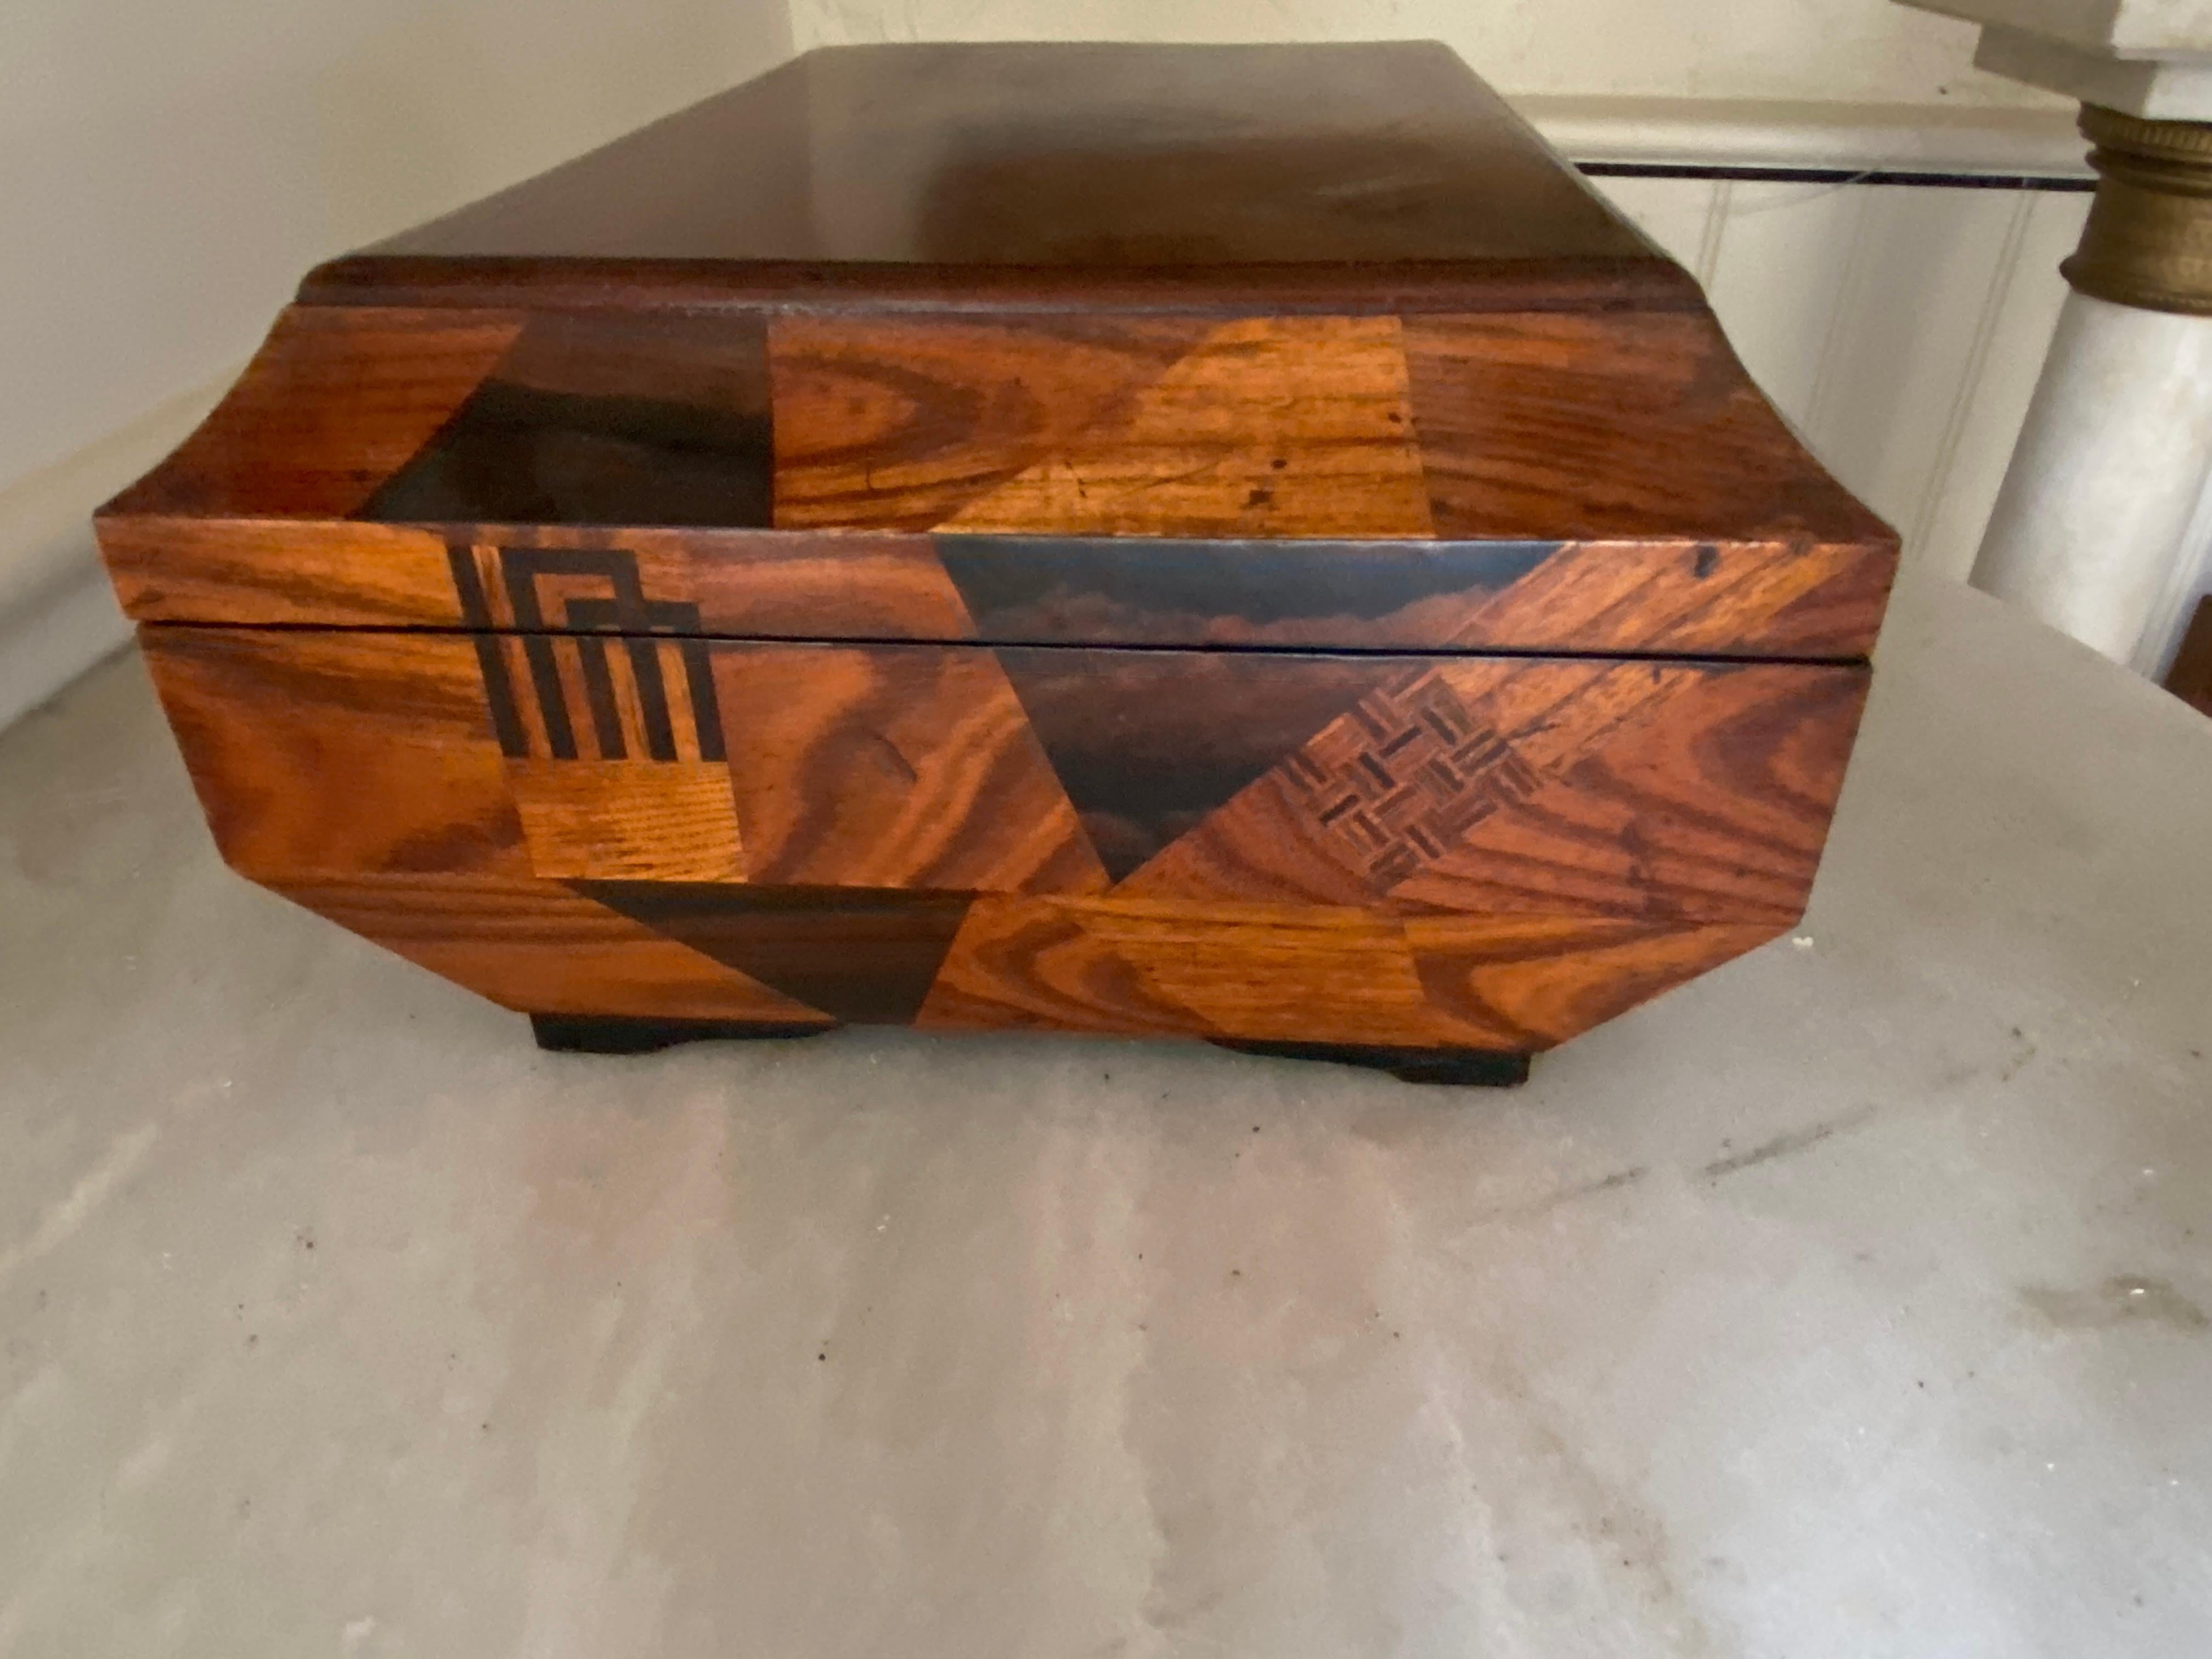 Anglo-Japanese 19th Century Japanese Elm and Calamander Parquetry Sarcophagus Work Box For Sale